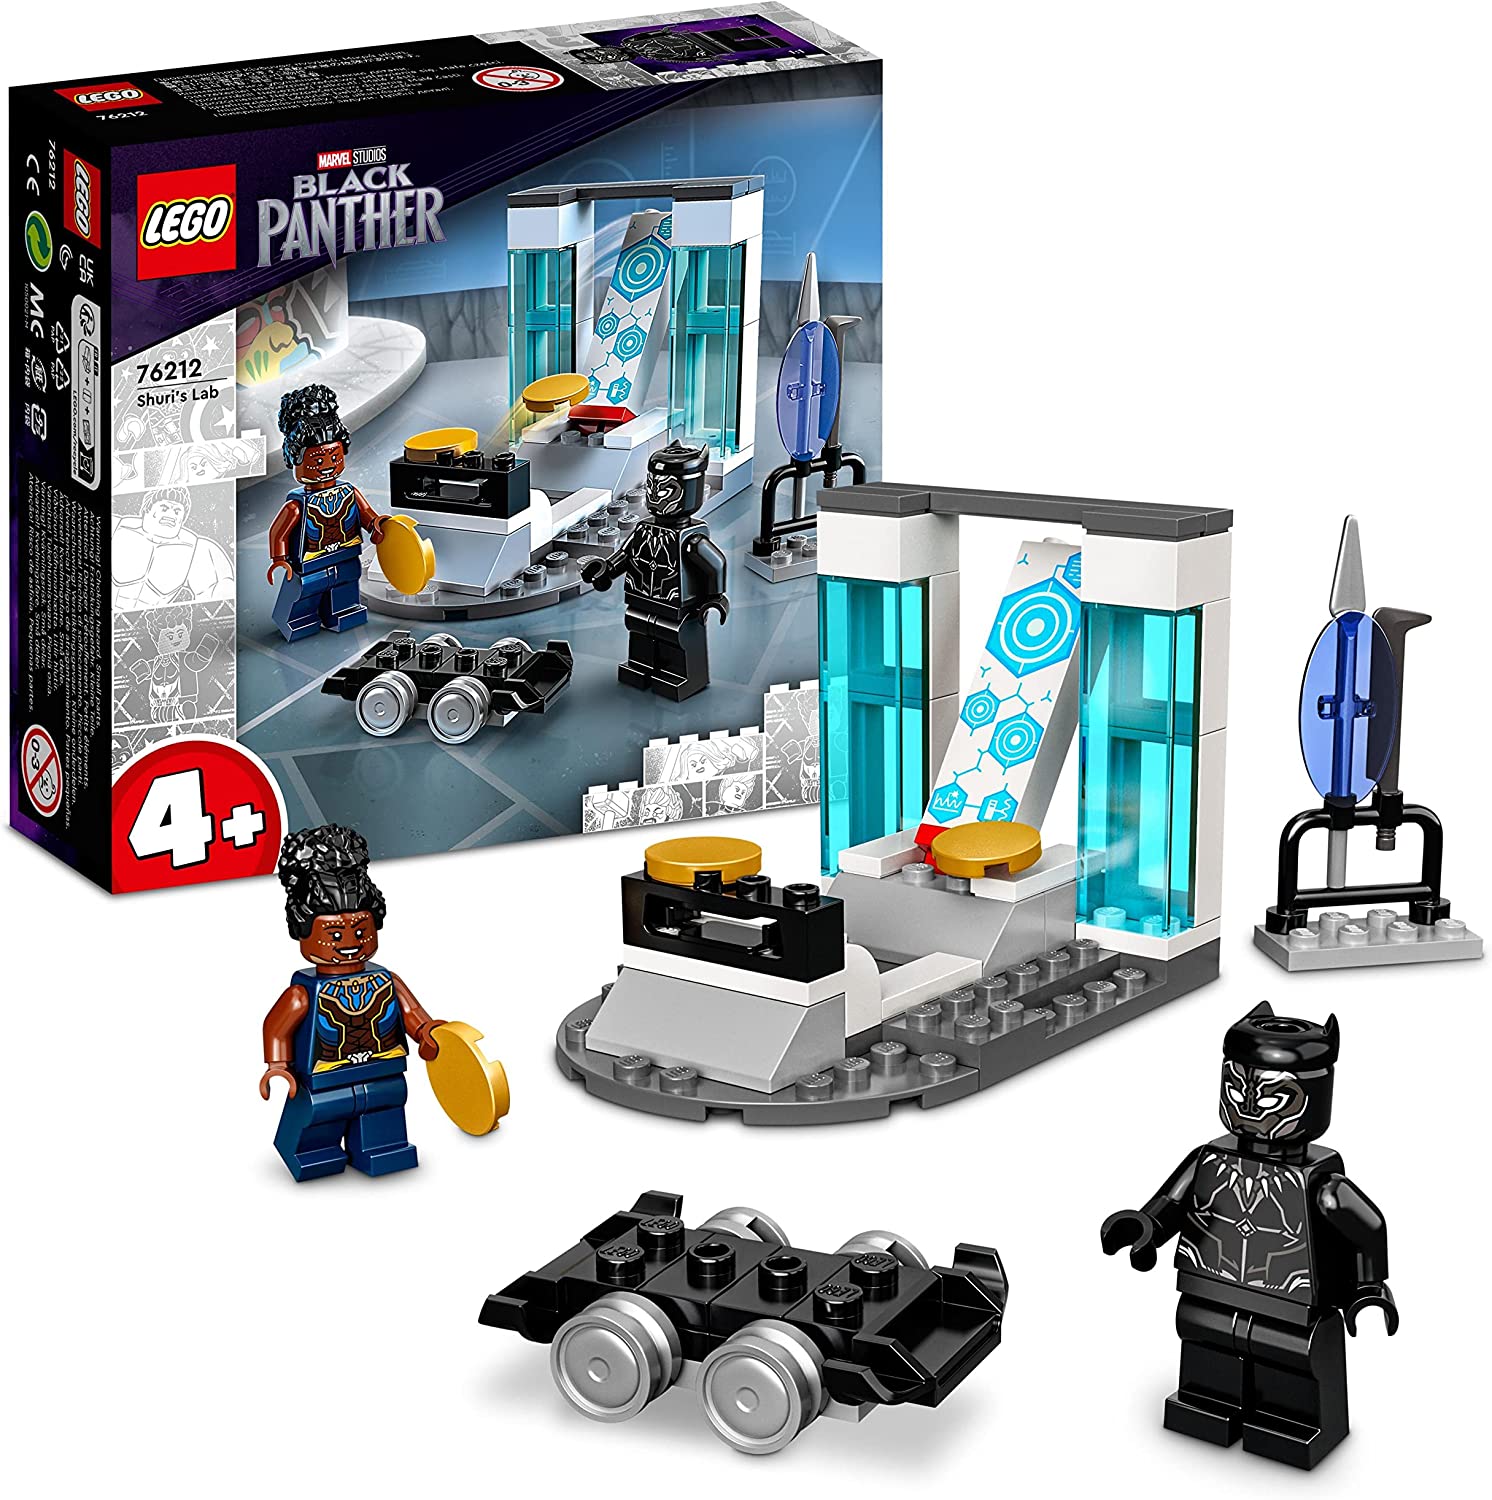 LEGO 76212 Marvel Shuris Laboratory, Black Panther Educational Toy for Building with Mini Figures, Toy for Girls and Boys from 4 Years, Avengers Gift